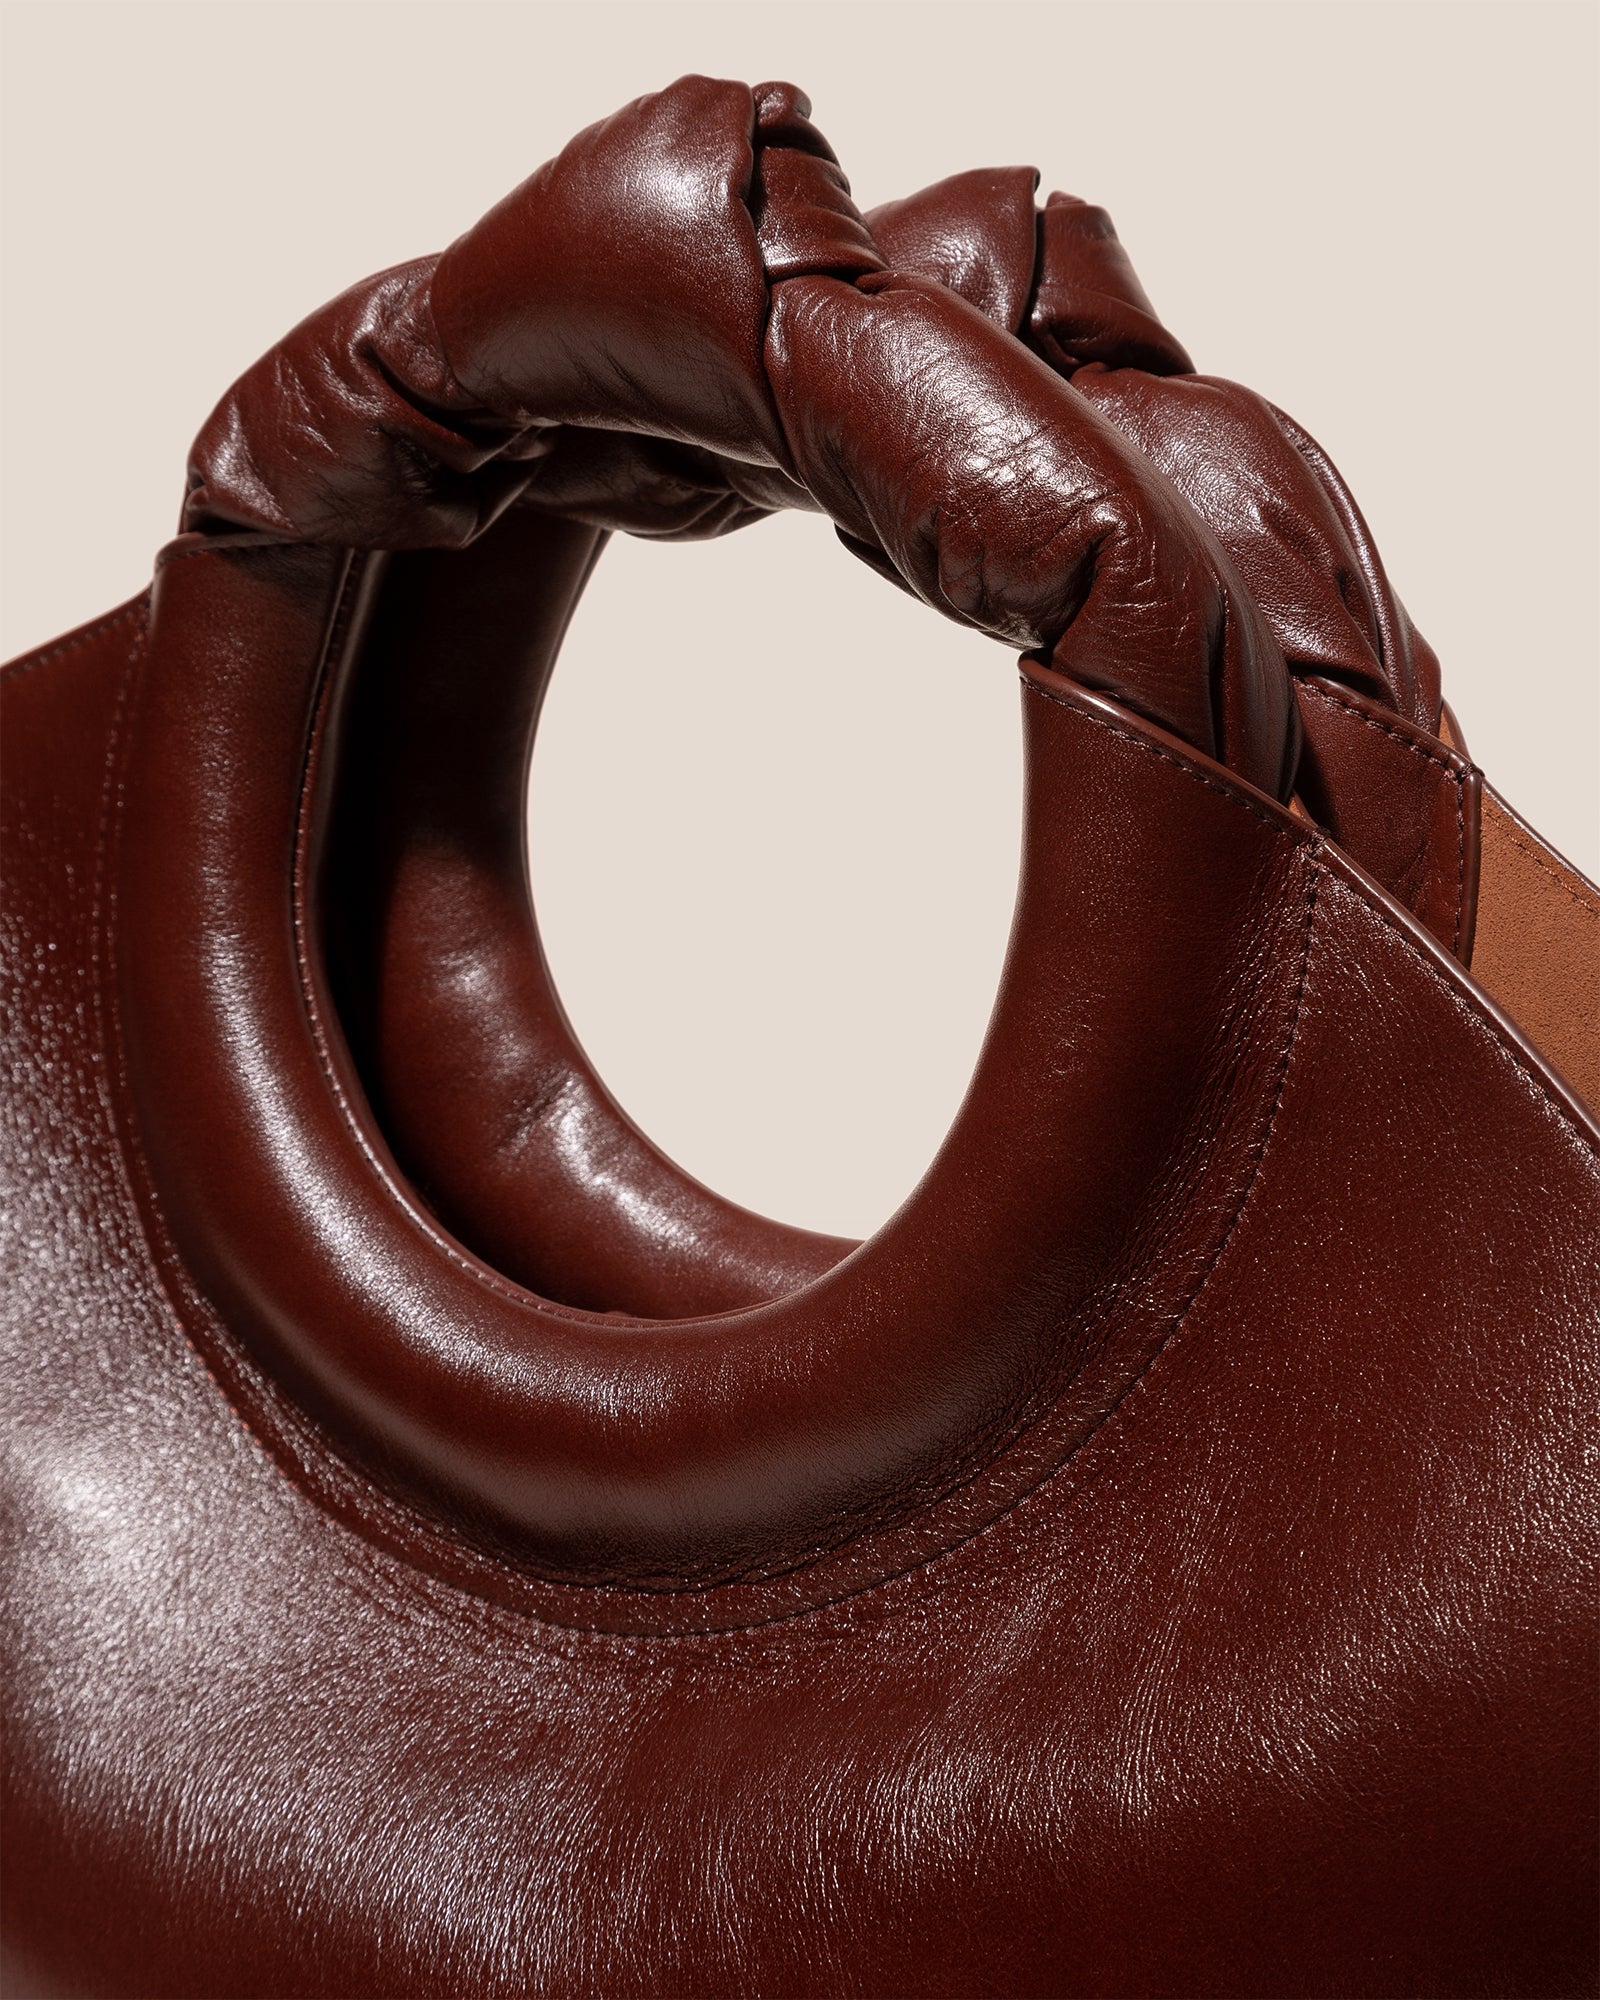 CASTELL - Knotted-handle Leather Tote Bag – Hereu Studio